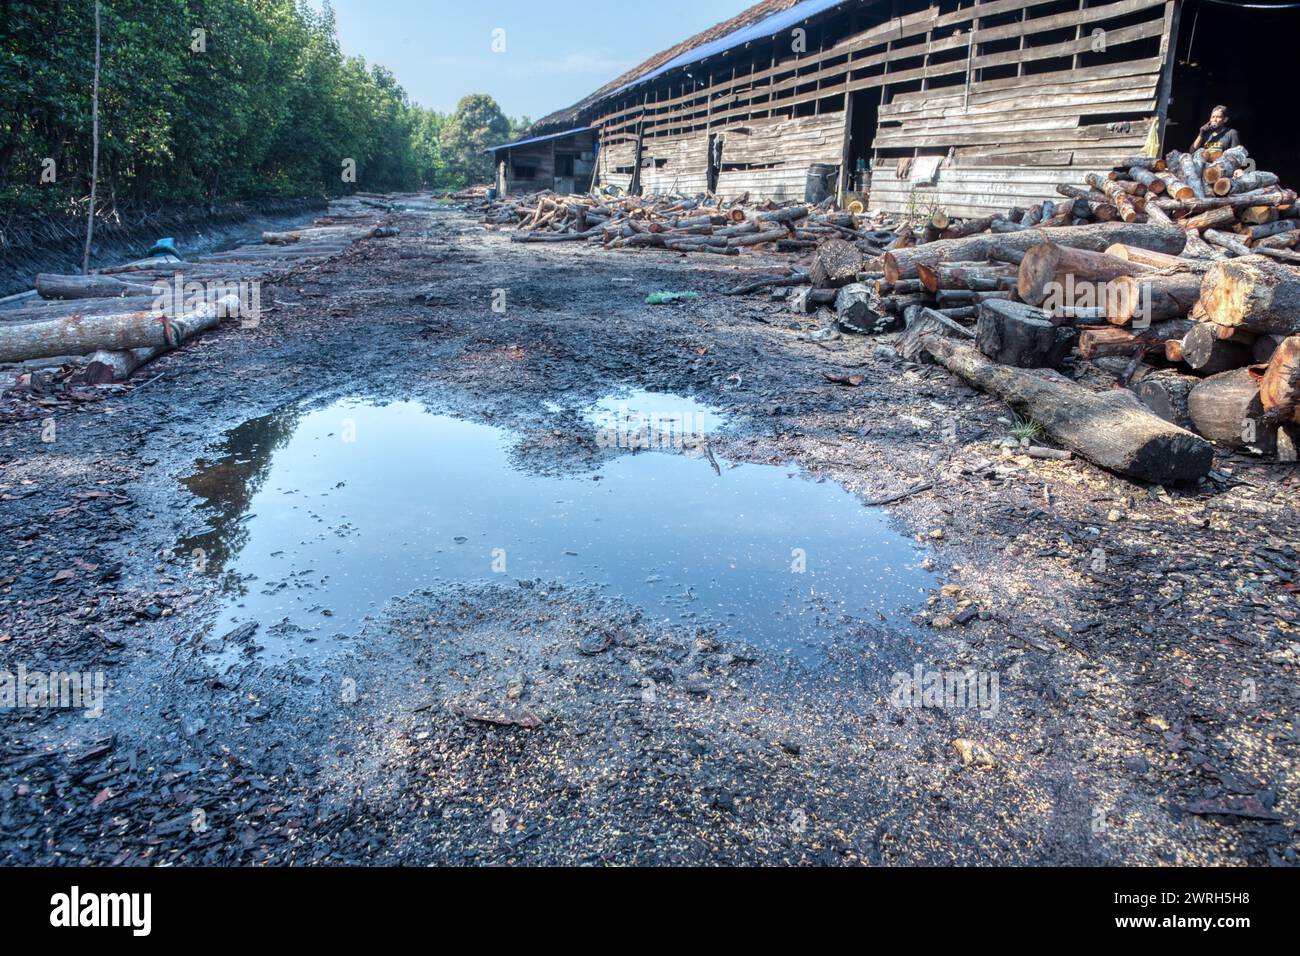 Scene of mangrove logs outside the charcoal factory shed. Stock Photo